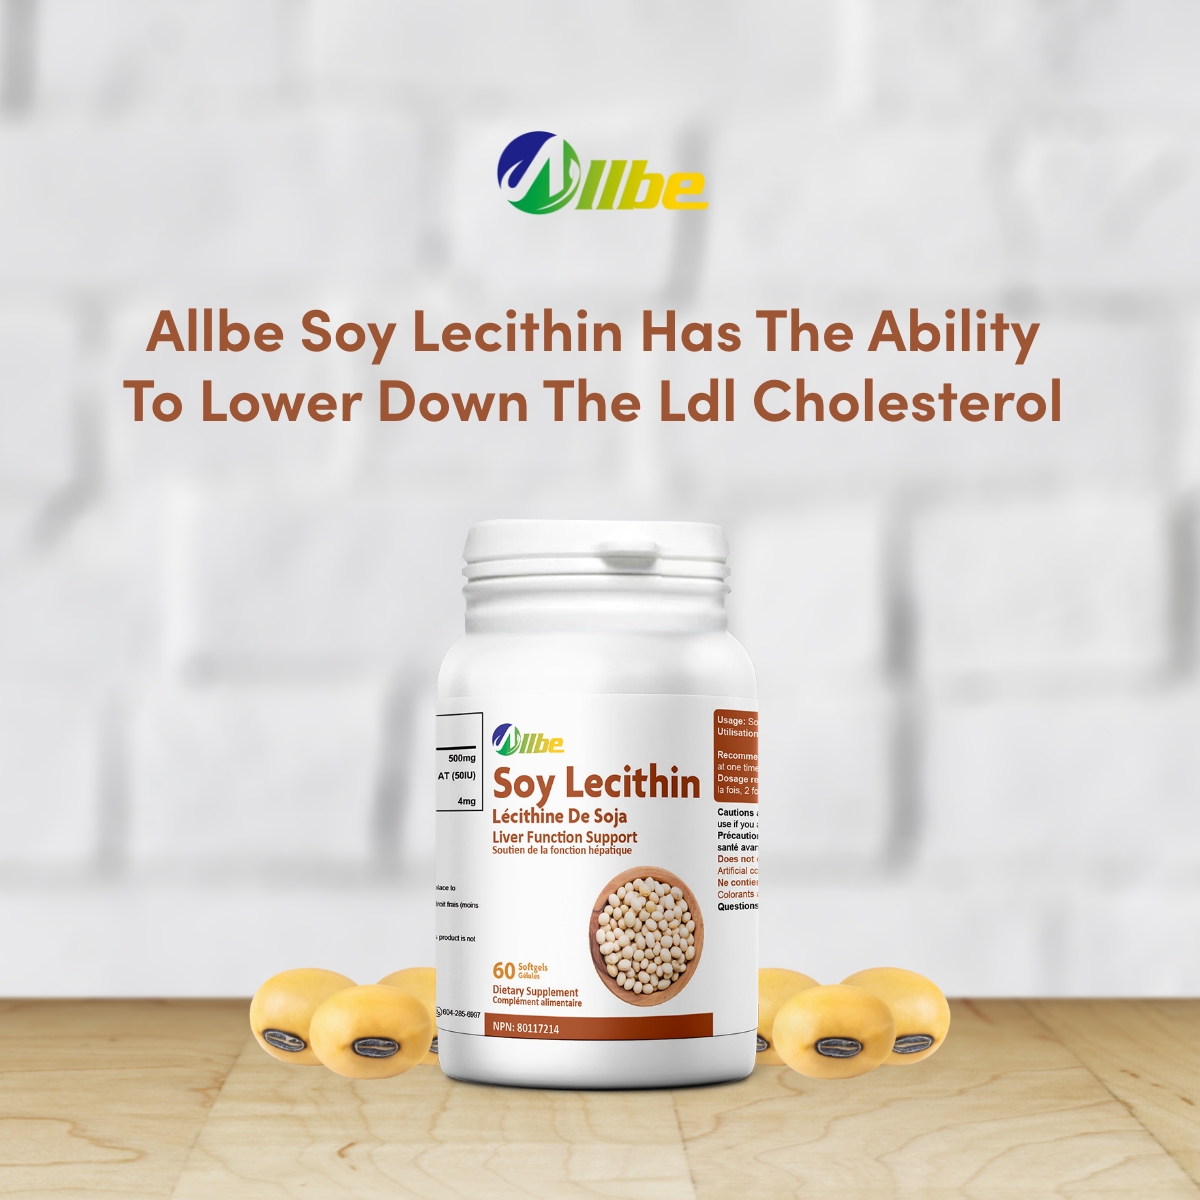 ALLBE Soy Lecithin Softgels provide antioxidant support and promote liver function. Made in Canada with soy lecithin, beta-carotene, and vitamin E. Shop now - bit.ly/3p3AAHy 
#AllbeCanada #Healthcareproducts